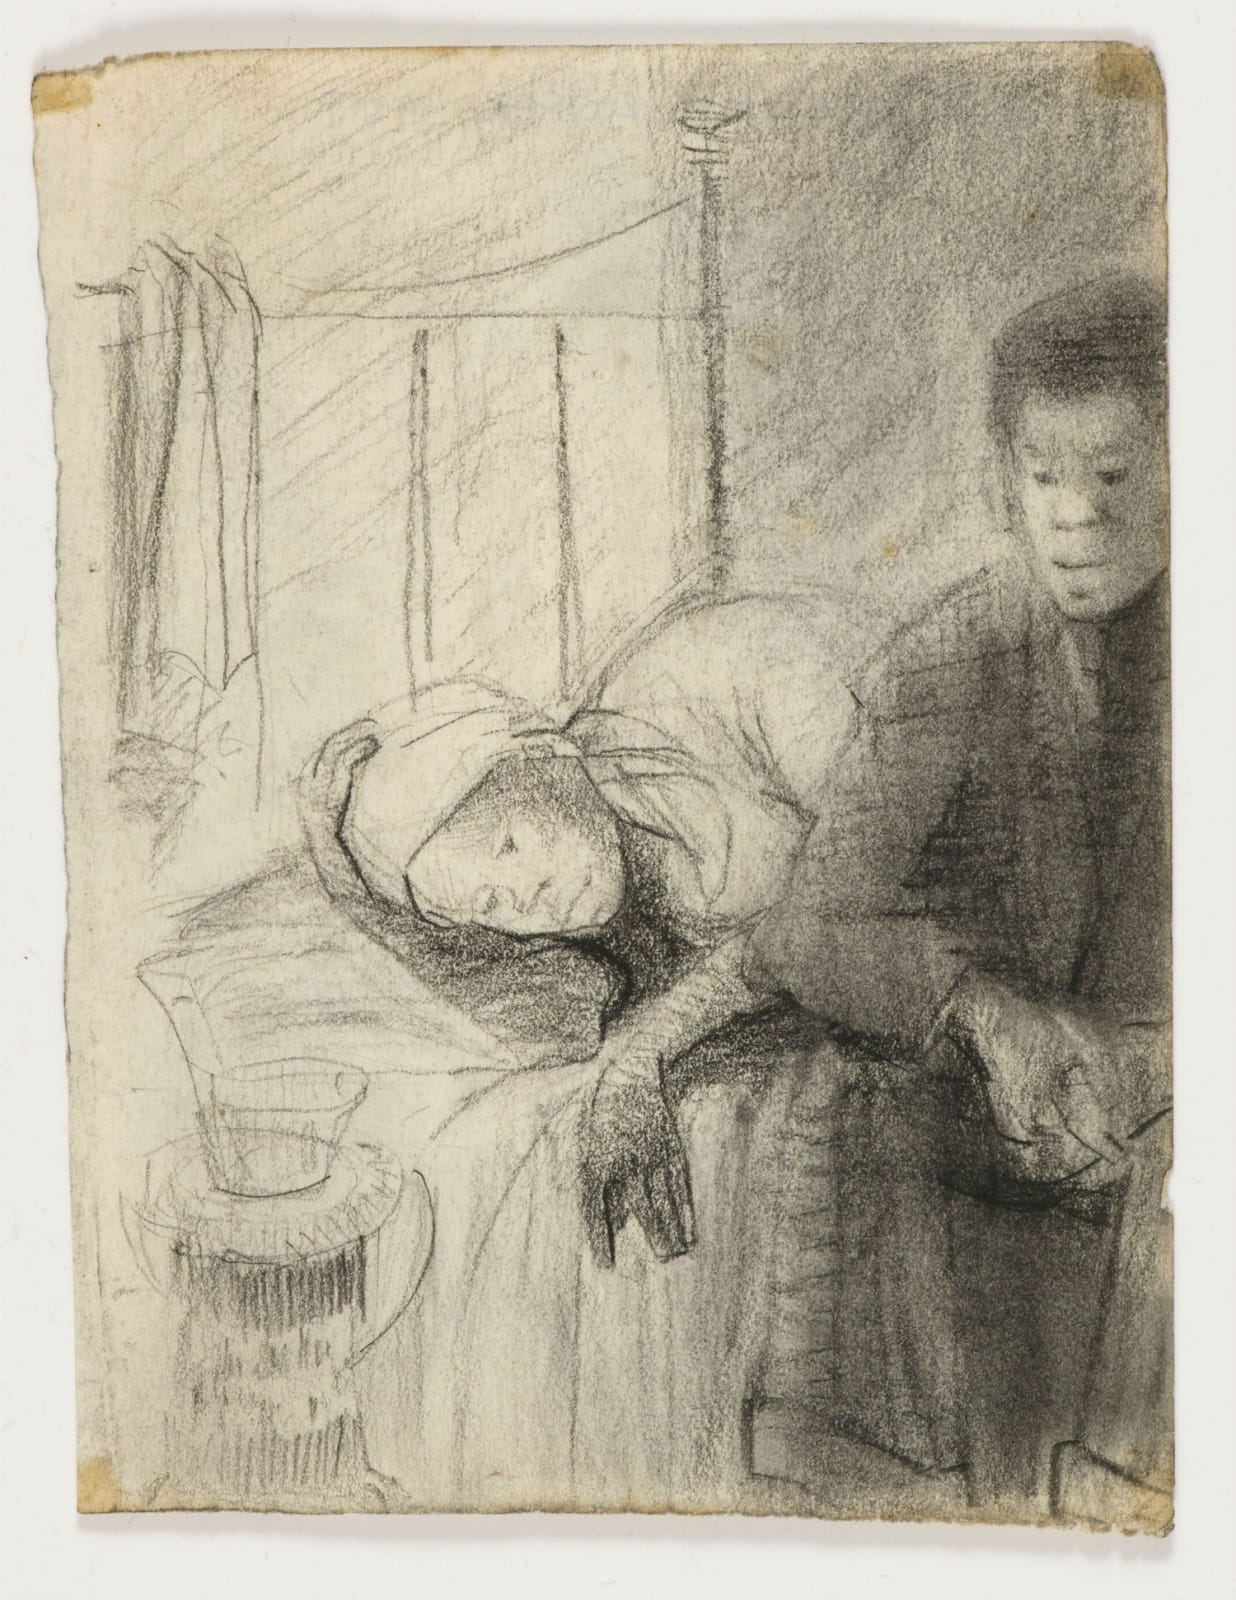 Eva Frankfurther (1930-1959) Catherine and John (Series of 8 Sketches from 'Whitechapel Diary') c.1956 Pencil on paper 14.4 x 10.5 cm Private Collection To see and discover more about this artist click here